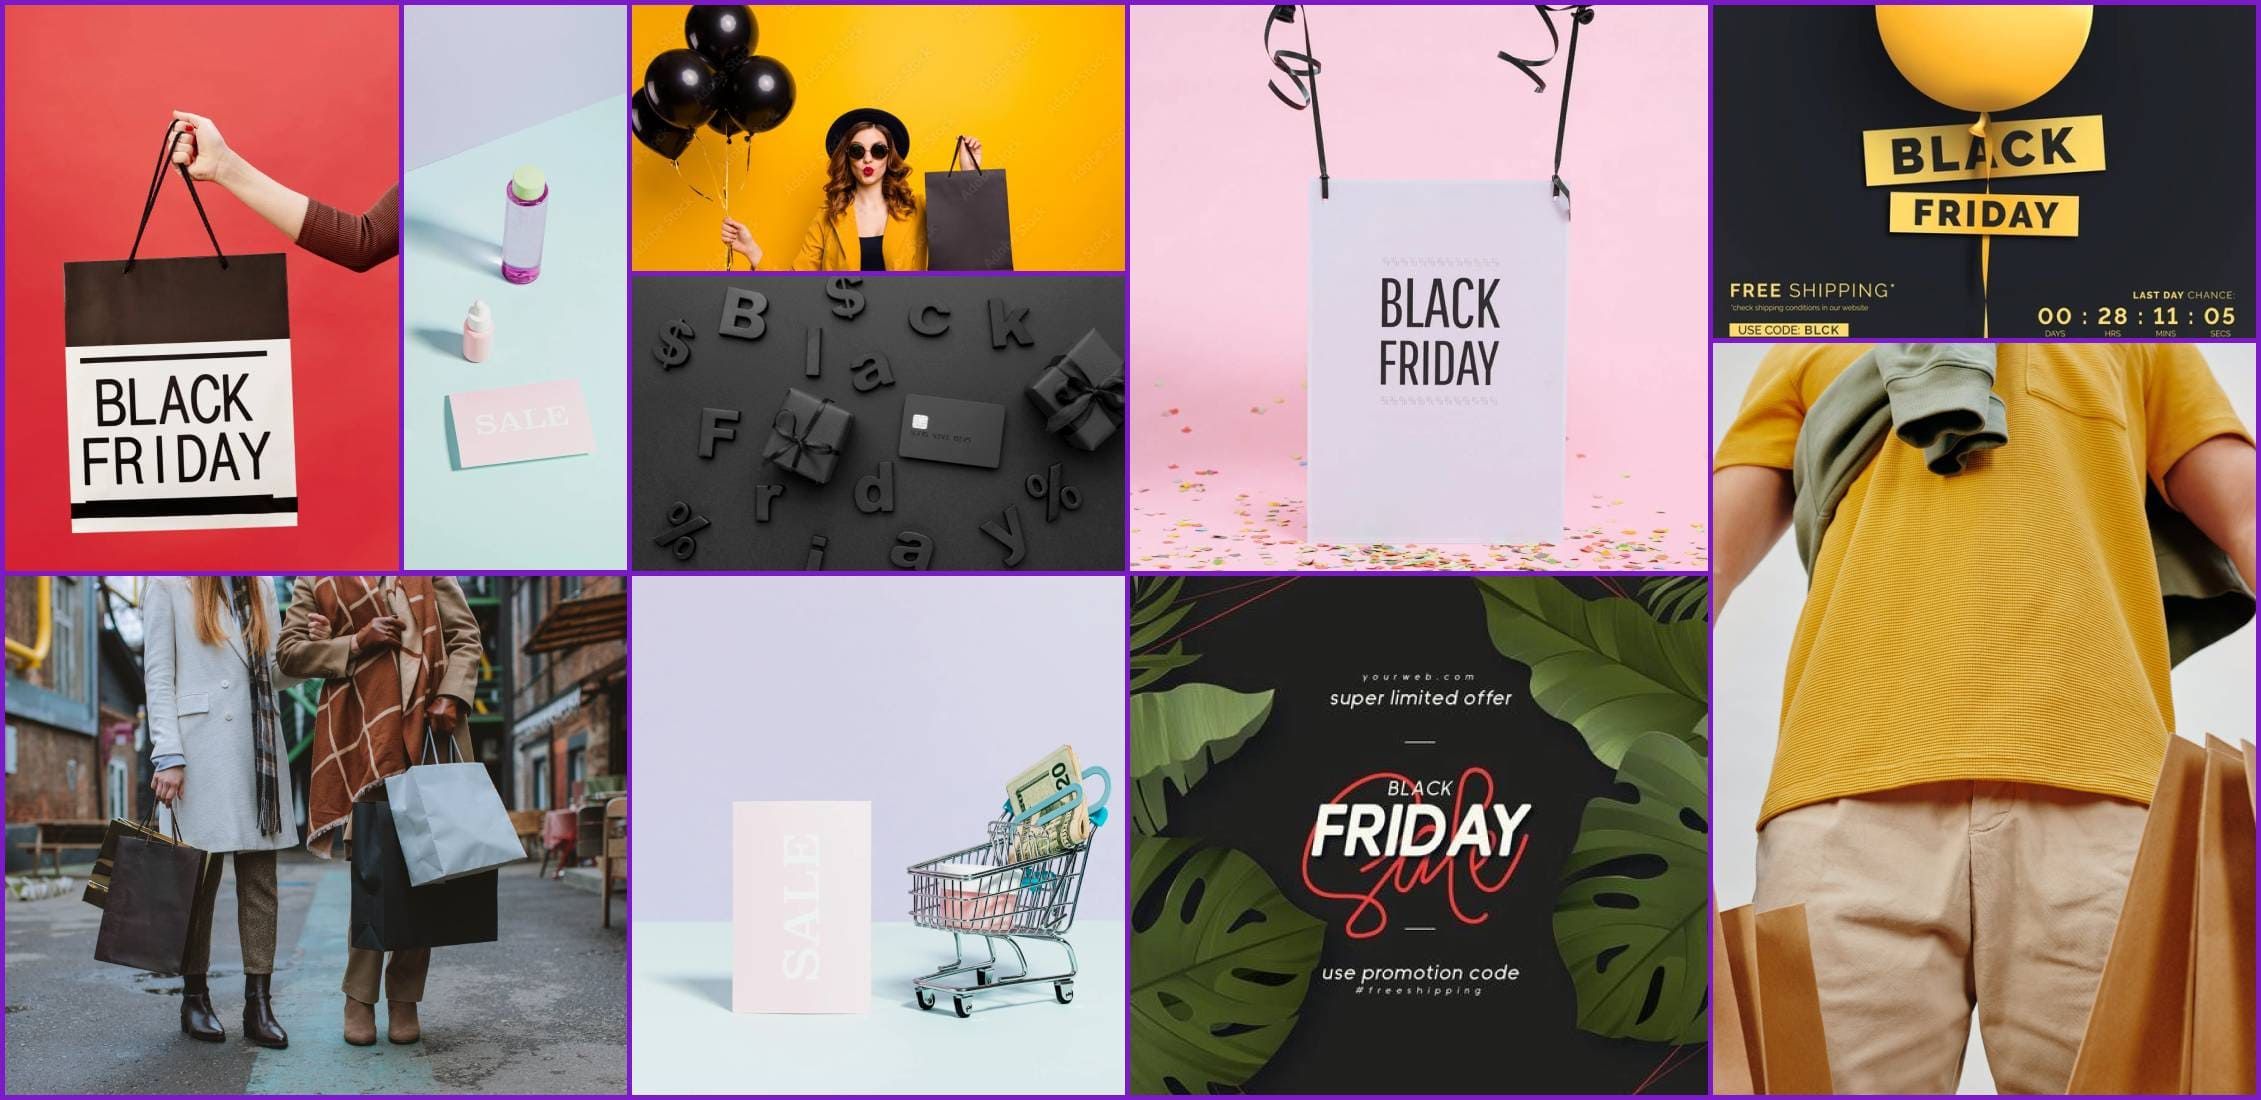 Black Friday stock photos and video footages free and premium Example.